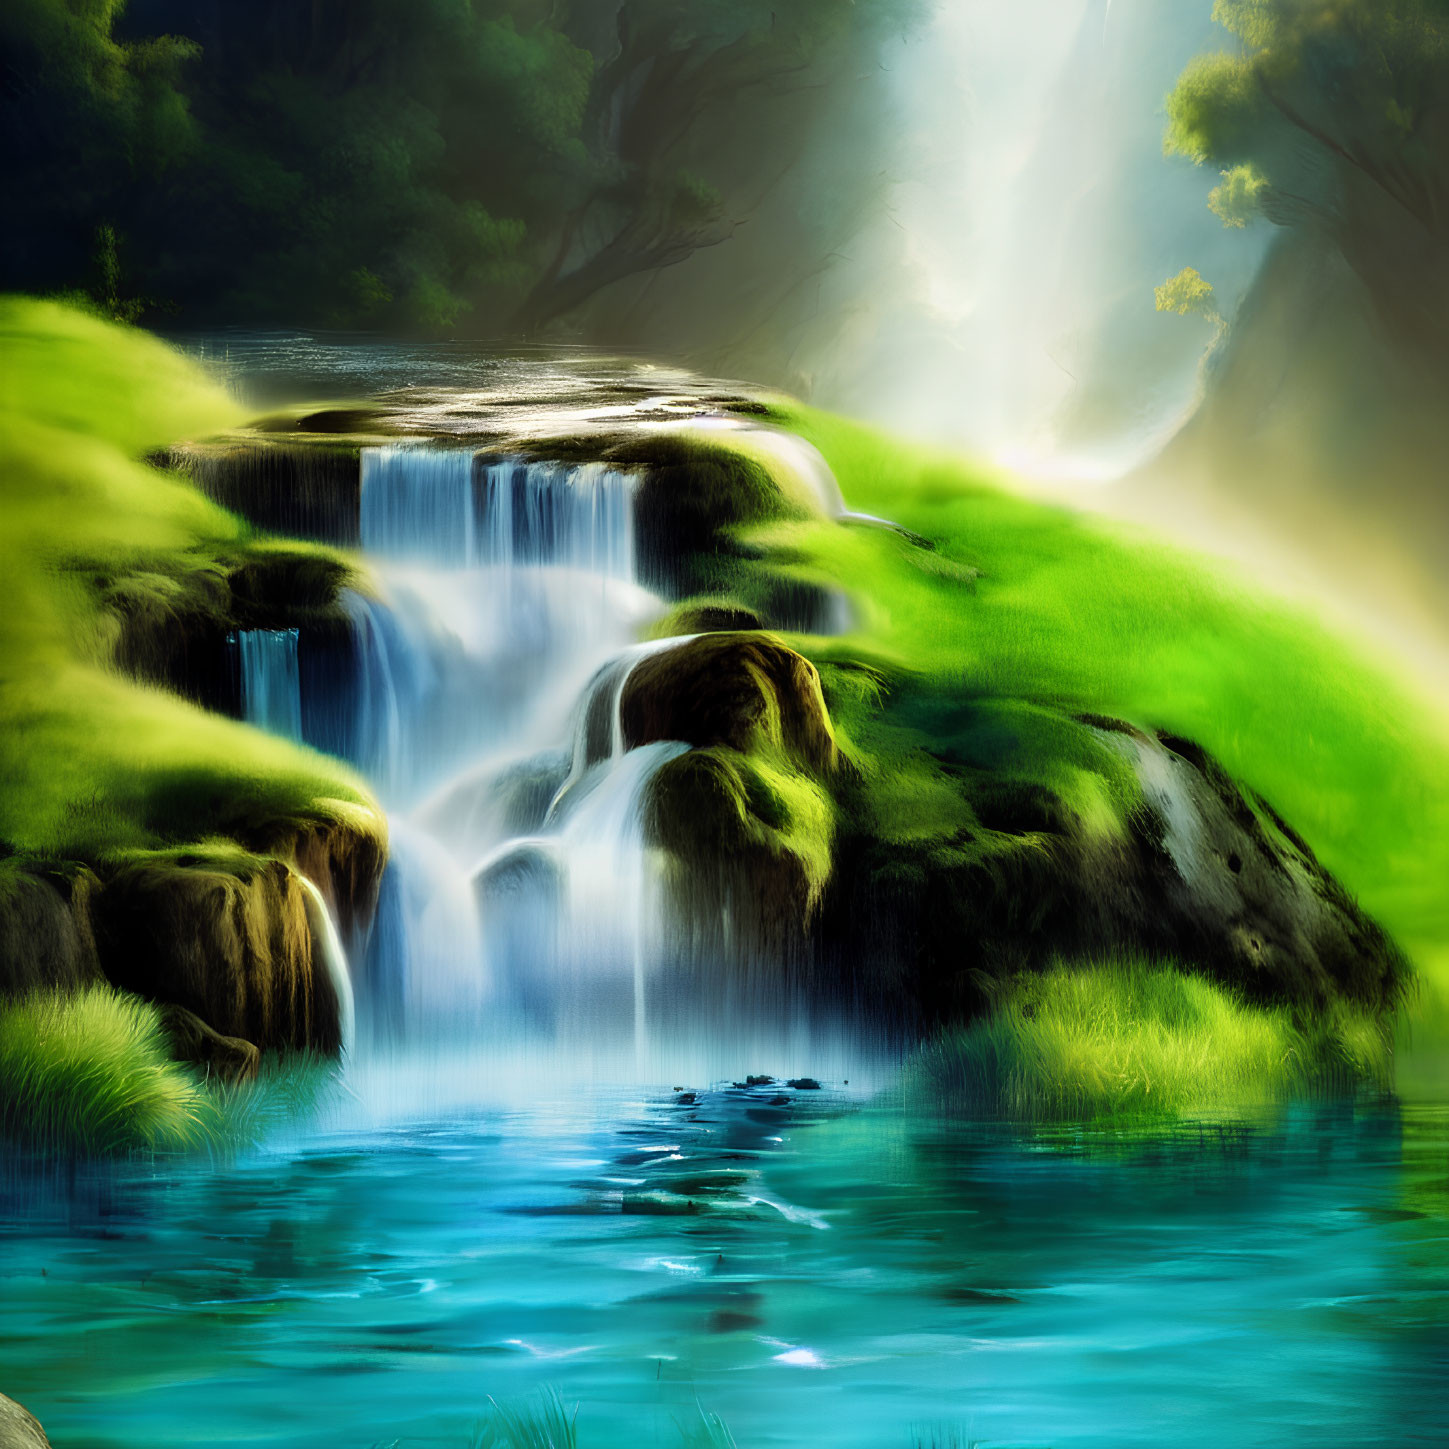 Serene Waterfall Surrounded by Lush Greenery and Blue Pool